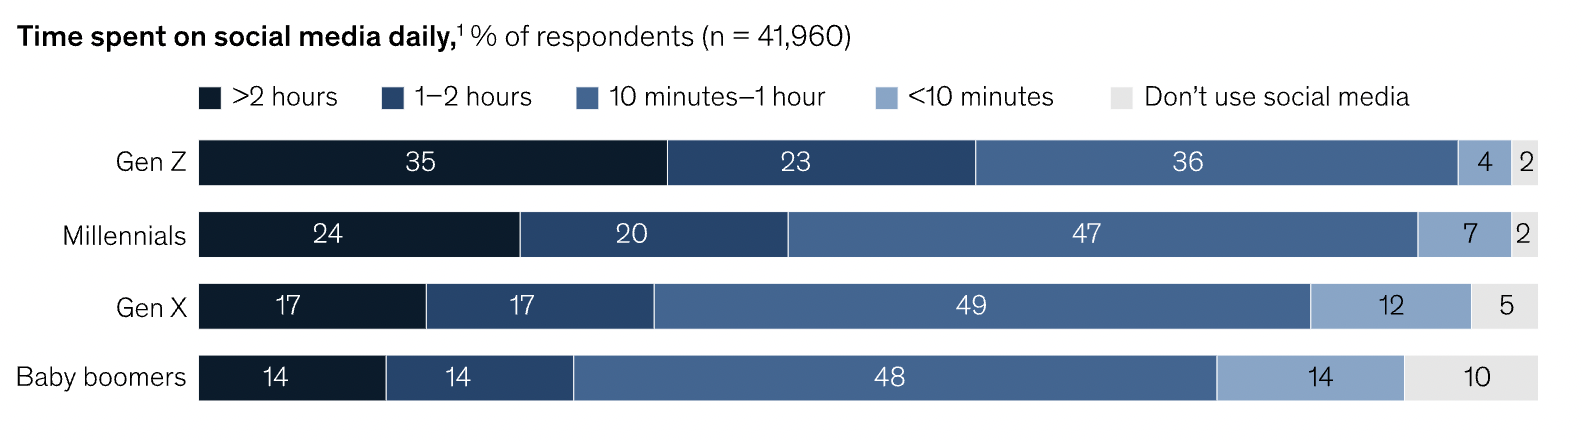 McKinsey chart showing the generation-wise distribution of time spent on social media daily